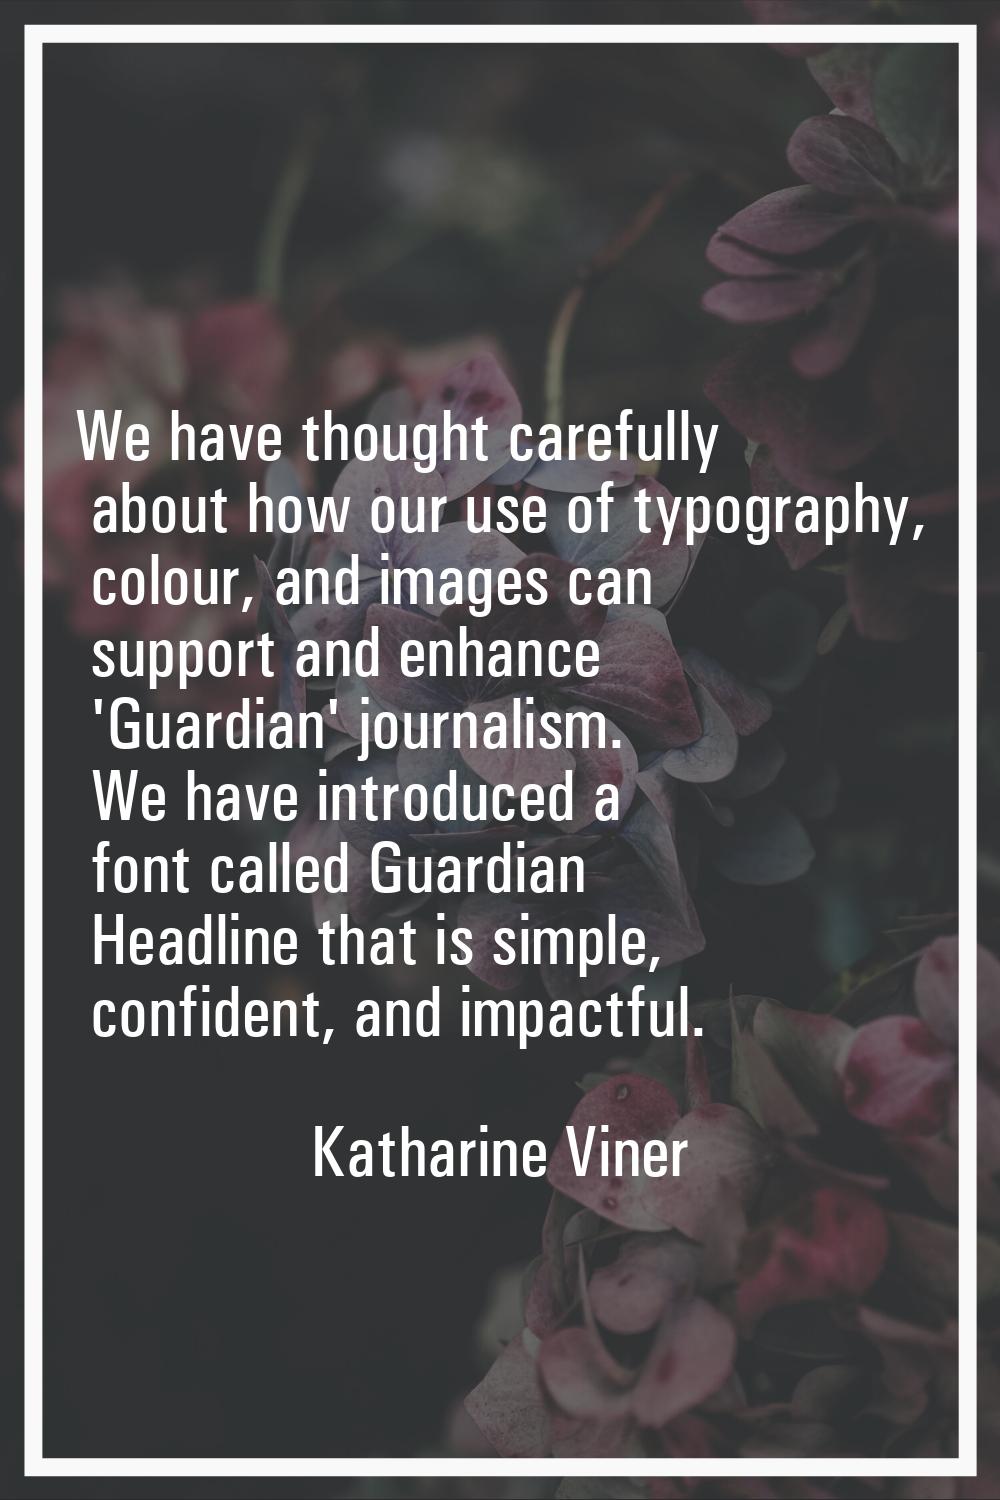 We have thought carefully about how our use of typography, colour, and images can support and enhan